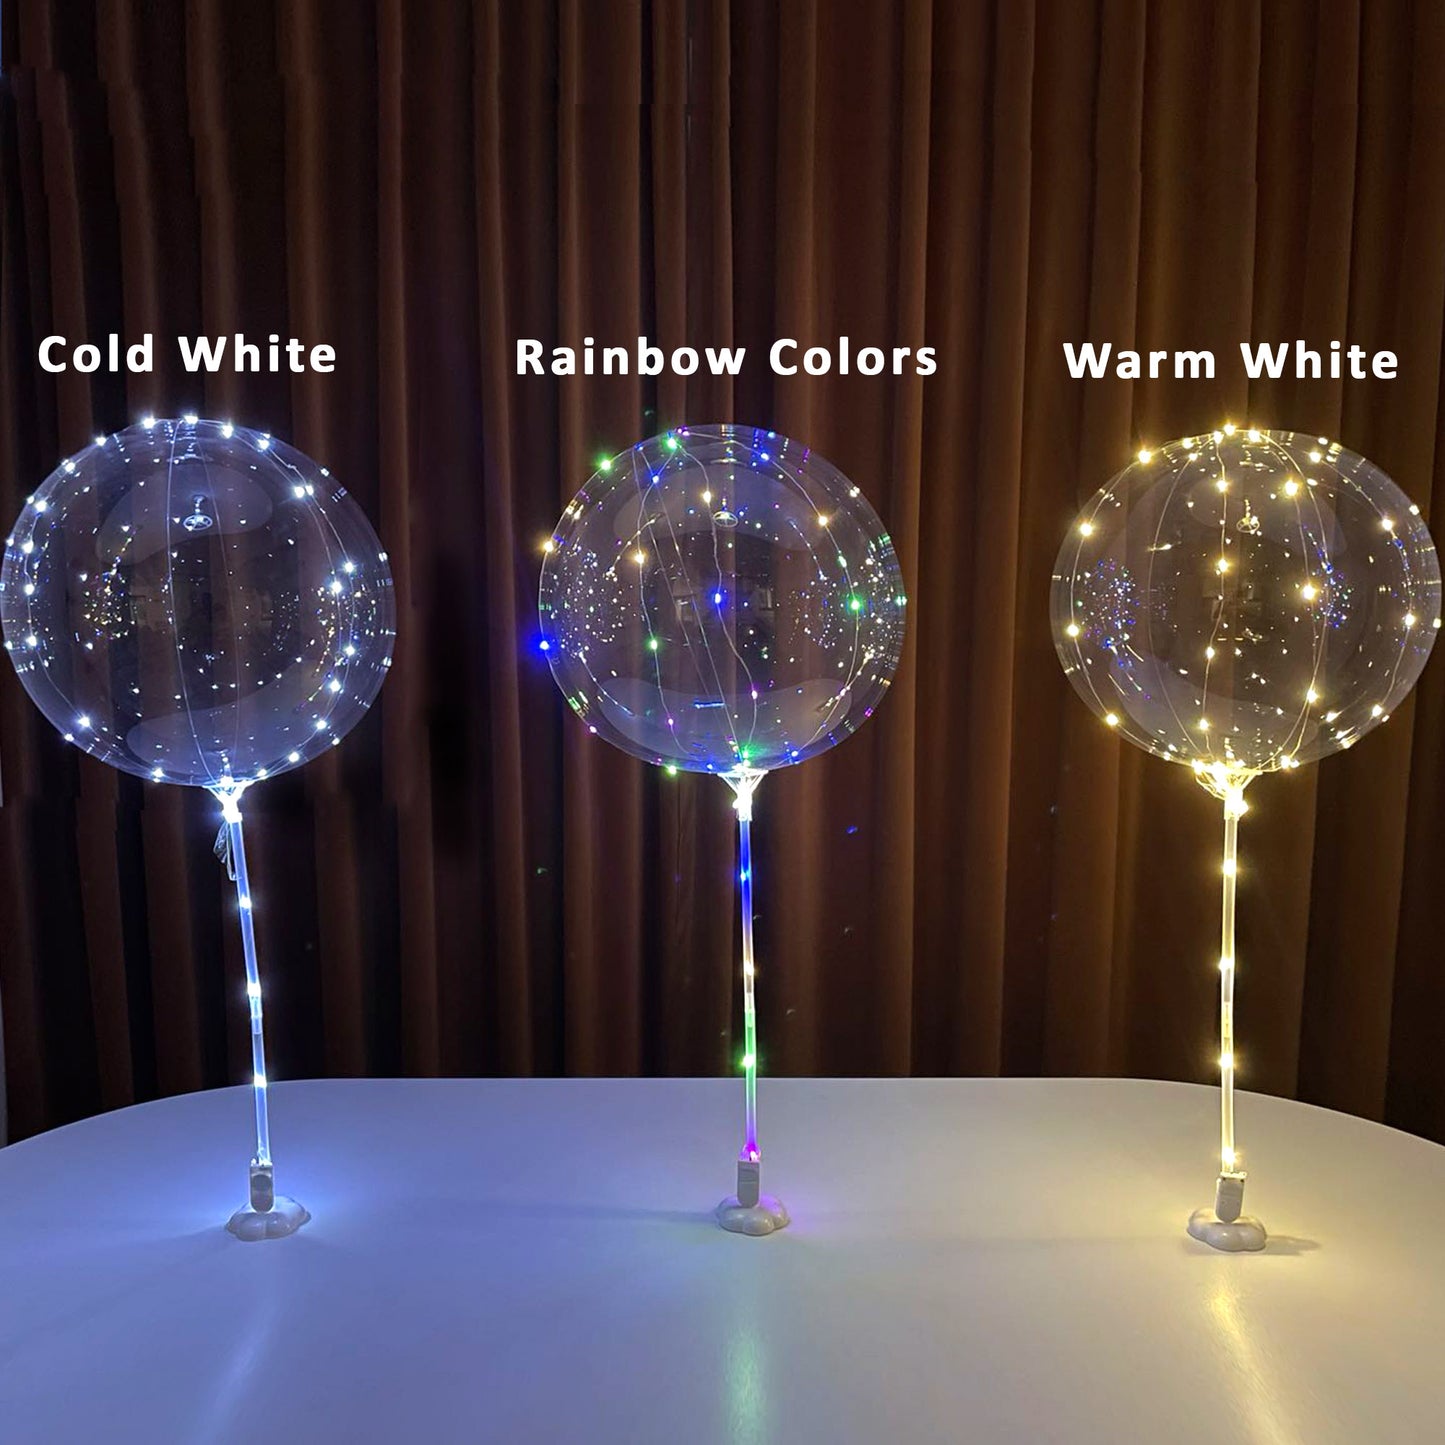 Restaurantware Balloonify 24 inch Bobo Balloons with Lights, 10 Durable Transparent Balloons with Lights - Colorful String Light, Color Handles, Plastic Bobo Balloon